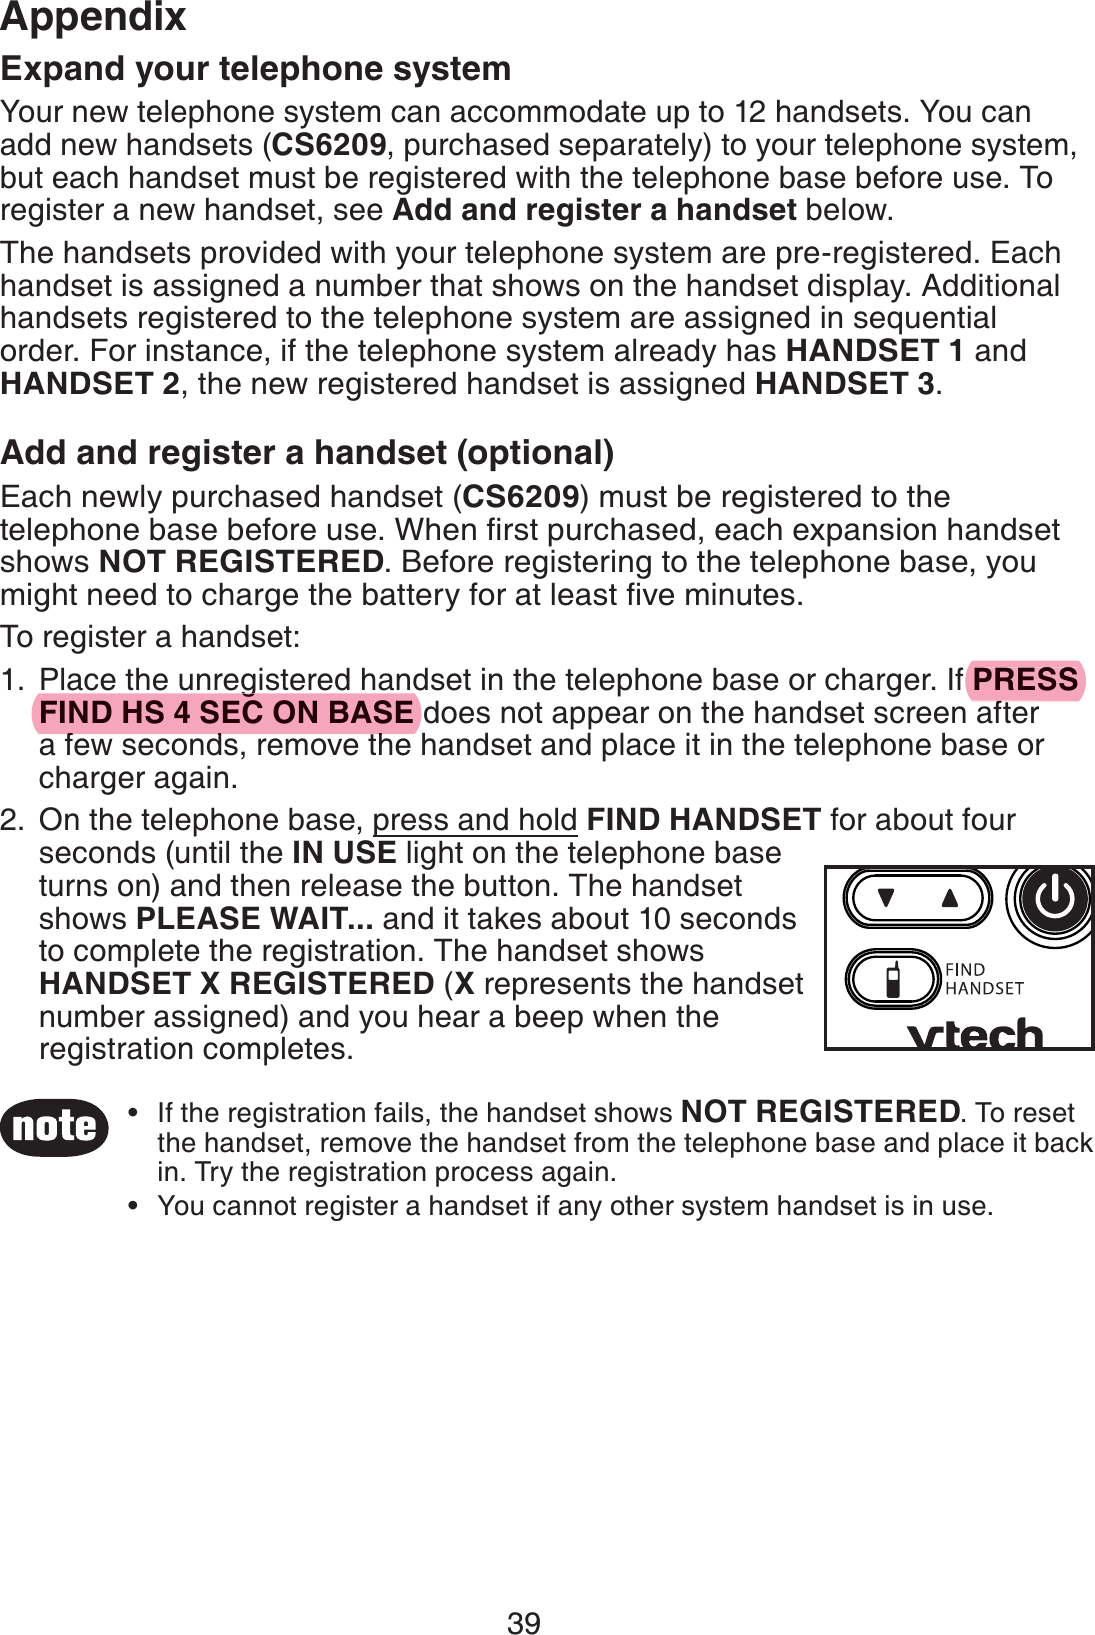 39AppendixExpand your telephone systemYour new telephone system can accommodate up to 12 handsets. You can add new handsets (CS6209, purchased separately) to your telephone system, but each handset must be registered with the telephone base before use. To register a new handset, see Add and register a handset below.The handsets provided with your telephone system are pre-registered. Each handset is assigned a number that shows on the handset display. Additional handsets registered to the telephone system are assigned in sequential order. For instance, if the telephone system already has HANDSET 1 and HANDSET 2, the new registered handset is assigned HANDSET 3.Add and register a handset (optional)Each newly purchased handset (CS6209) must be registered to the telephone base before use. When ﬁrst purchased, each expansion handset shows NOT REGISTERED. Before registering to the telephone base, you might need to charge the battery for at least ﬁve minutes.To register a handset:Place the unregistered handset in the telephone base or charger. If PRESS FIND HS 4 SEC ON BASE does not appear on the handset screen after a few seconds, remove the handset and place it in the telephone base or charger again.On the telephone base, press and hold FIND HANDSET for about four seconds (until the IN USE light on the telephone base turns on) and then release the button. The handset shows PLEASE WAIT... and it takes about 10 seconds to complete the registration. The handset shows HANDSET X REGISTERED (X represents the handset number assigned) and you hear a beep when the registration completes.1.2.If the registration fails, the handset shows NOT REGISTERED. To reset the handset, remove the handset from the telephone base and place it back in. Try the registration process again.You cannot register a handset if any other system handset is in use.••PRESSfgFIND HS 4 SEC ON BASEfd h